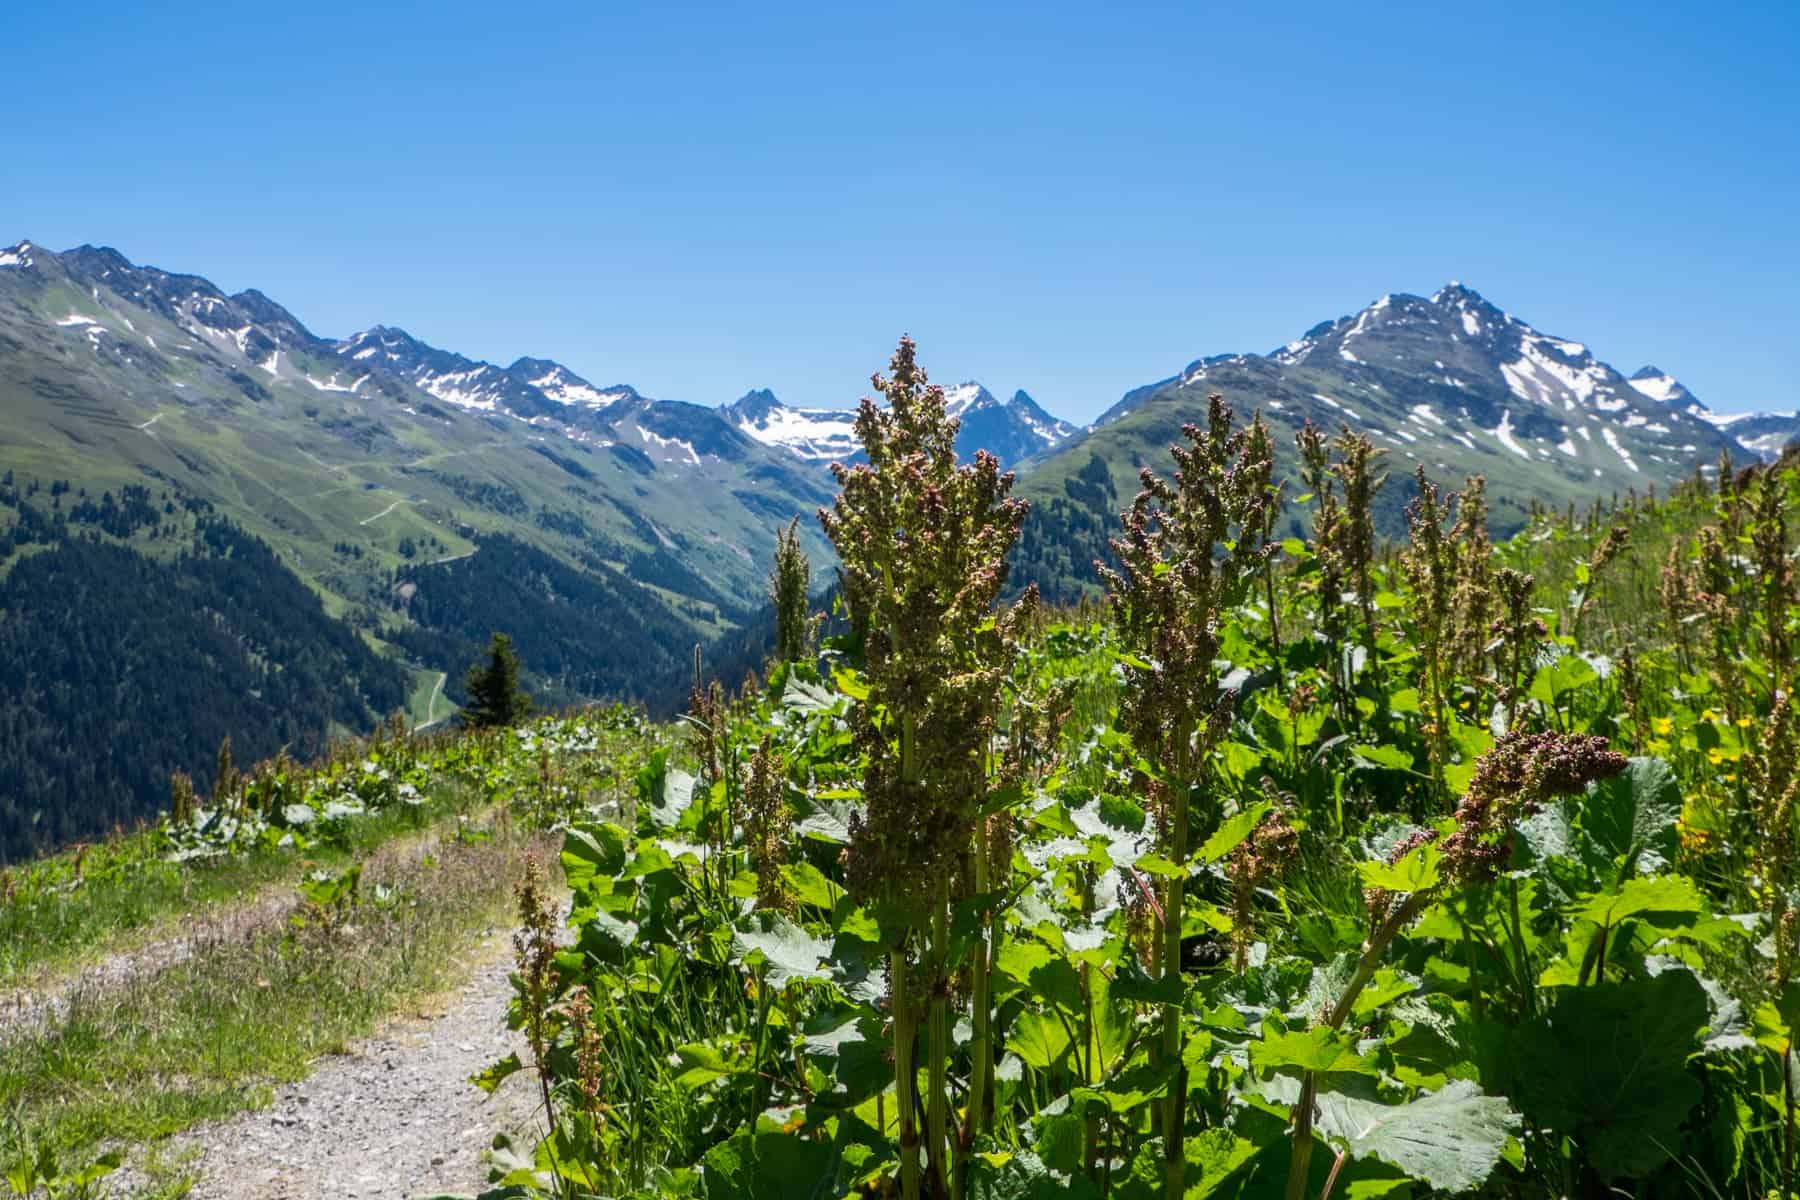 Tall, green mountain herbs in St Anton am Arlberg growing next to a hiking path in the Galzig mountain with the Alps in the background